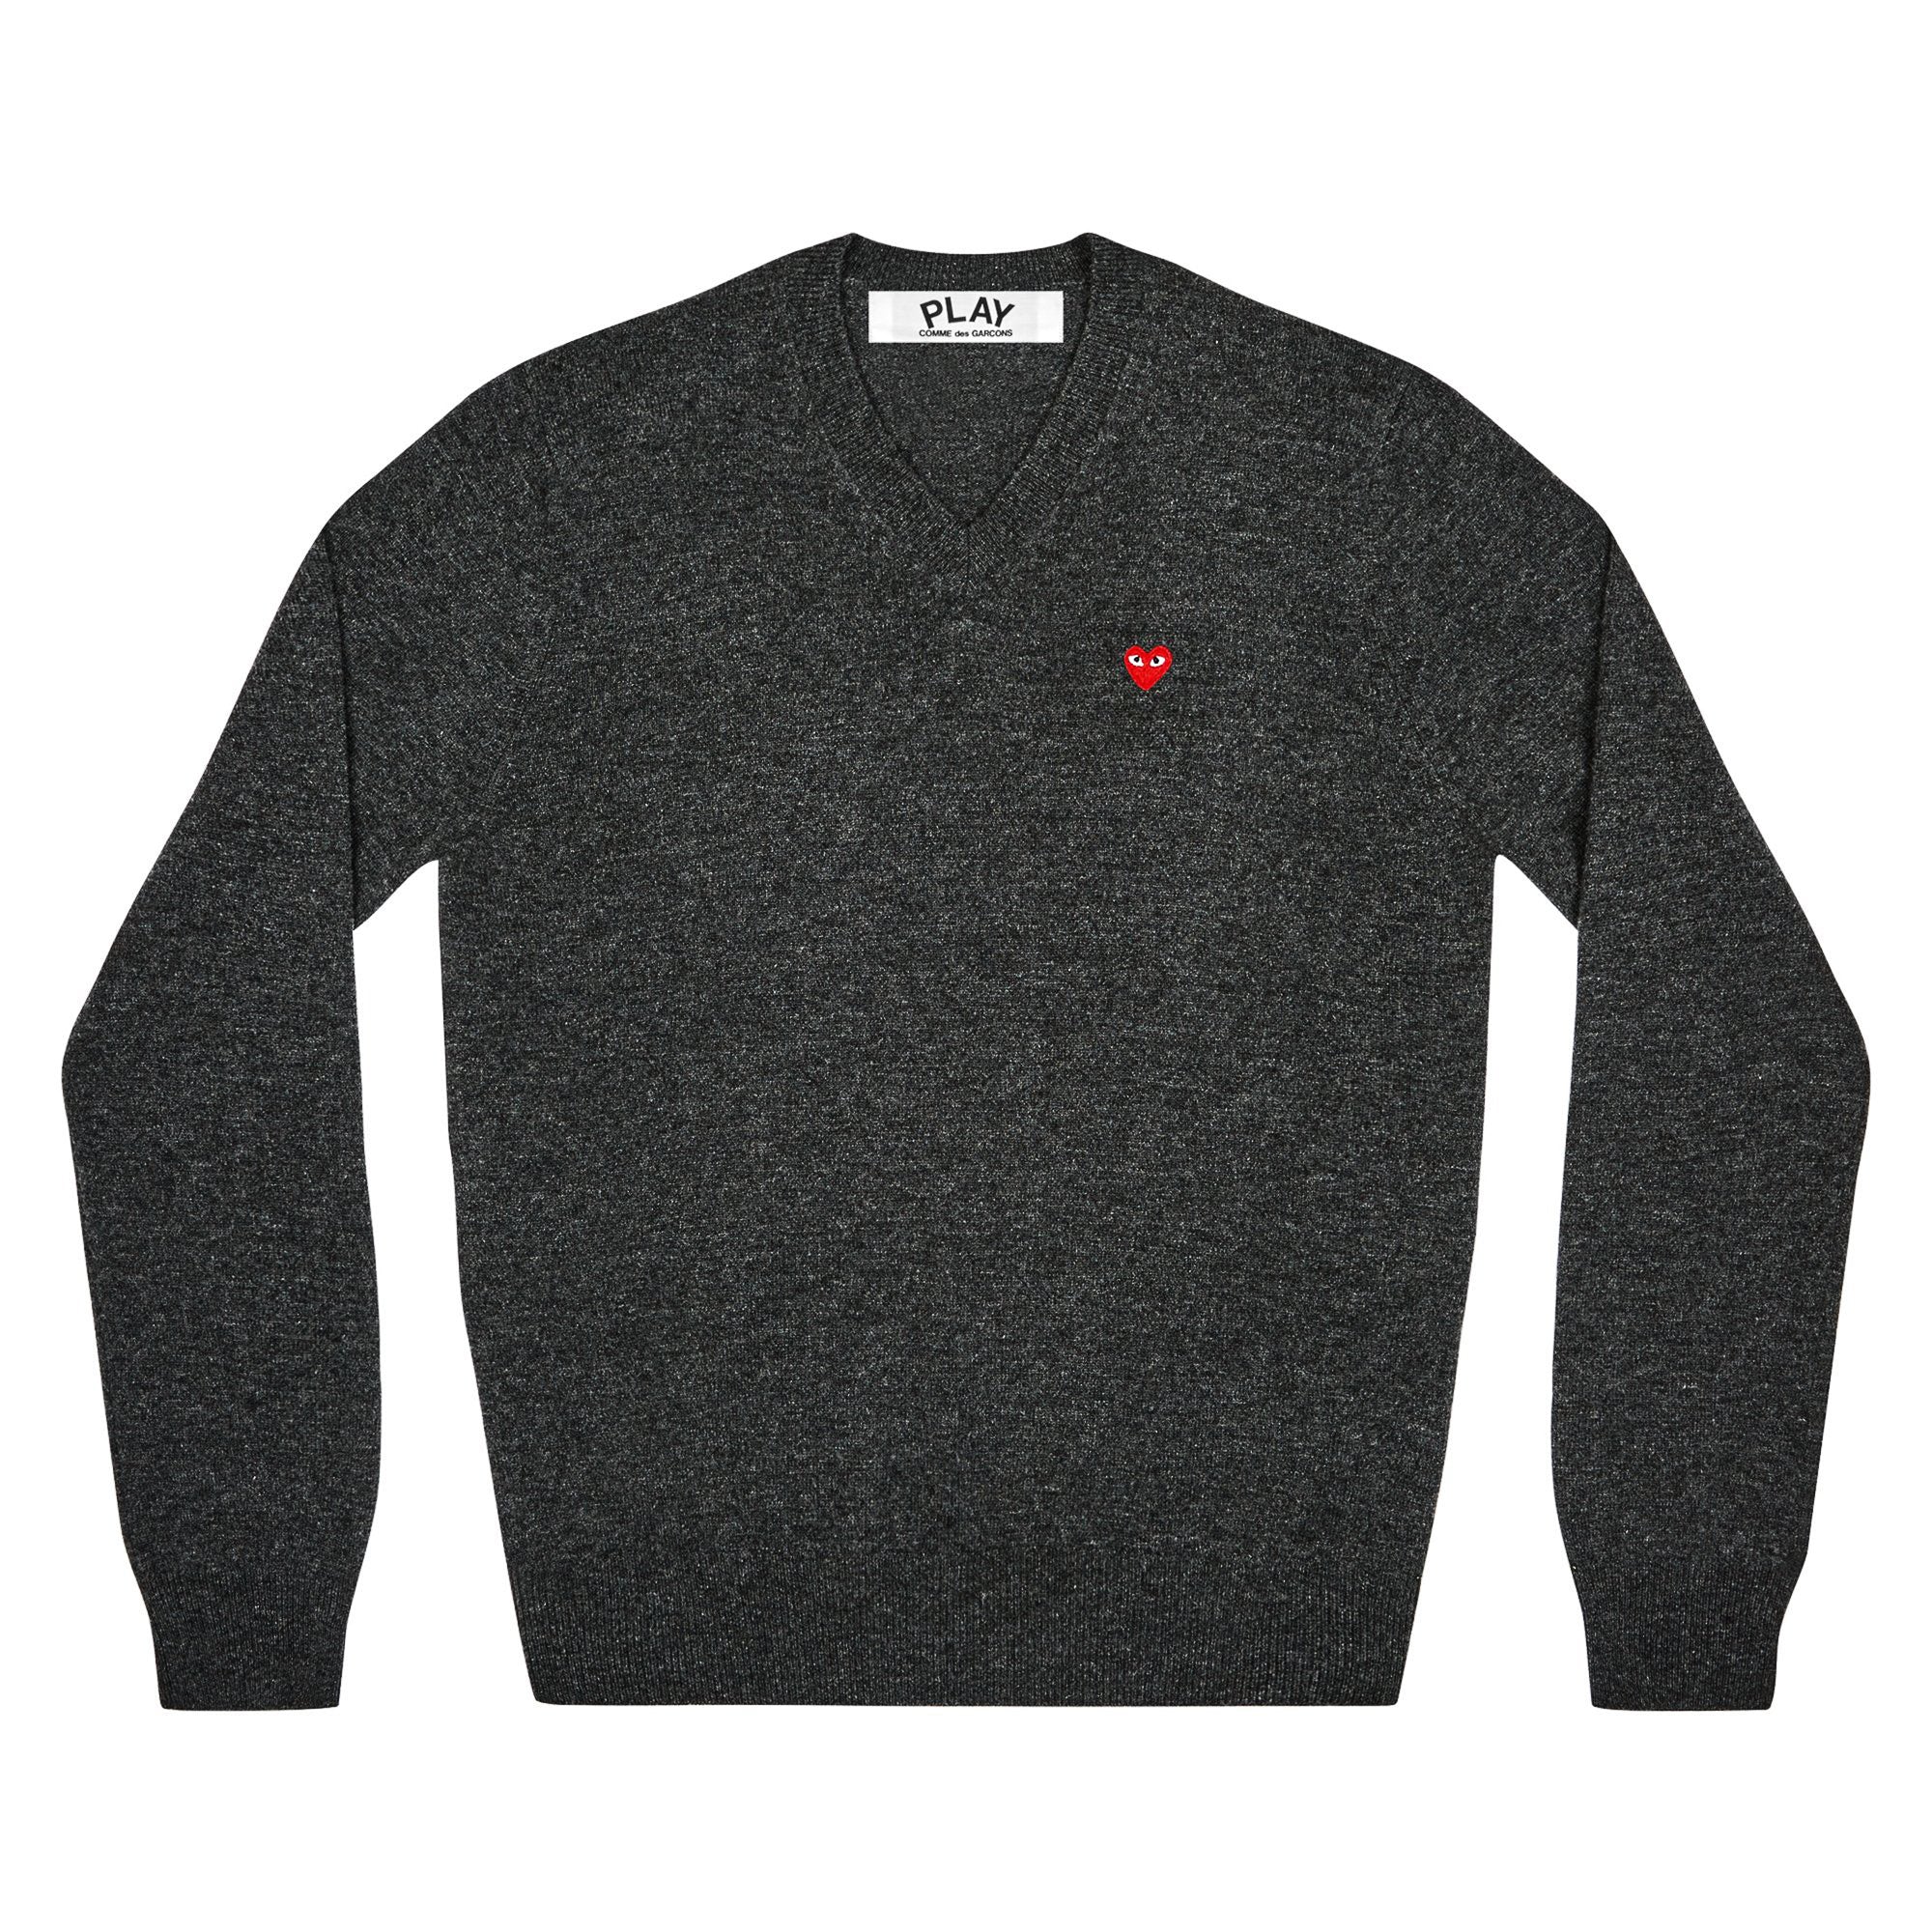 PLAY CDG - V NECK SWEATER WITH SMALL RED HEART - (CHARCOAL GREY) view 1